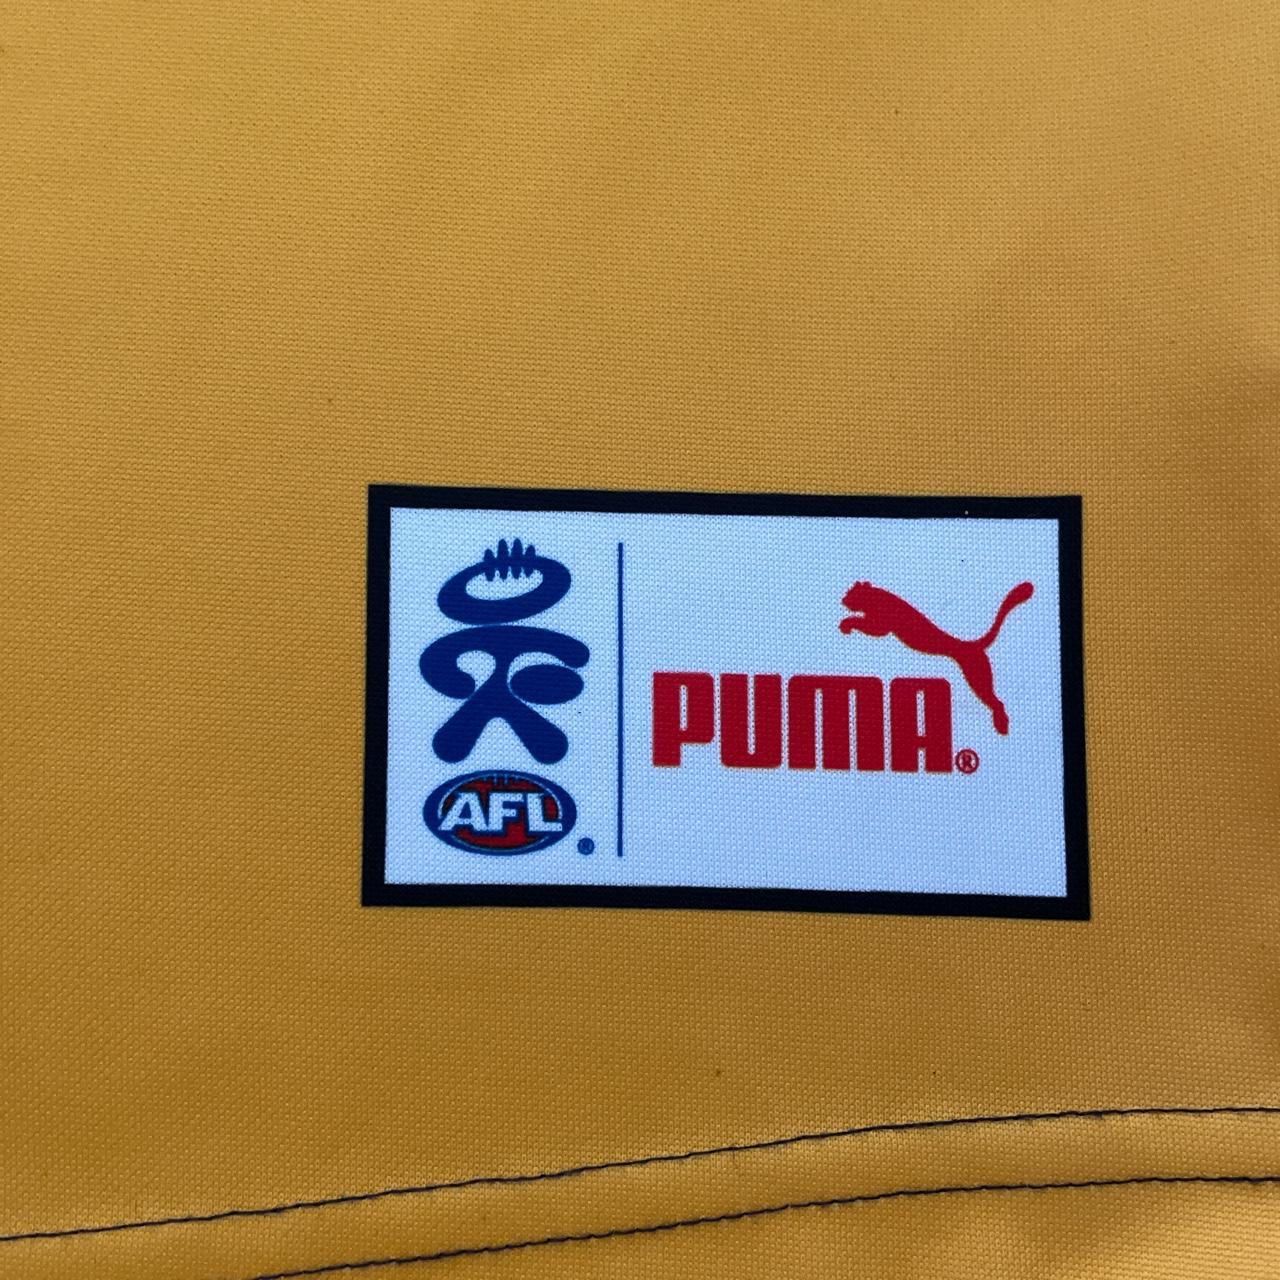 West Coast Eagles early 2000’s AFL Puma jersey with... - Depop